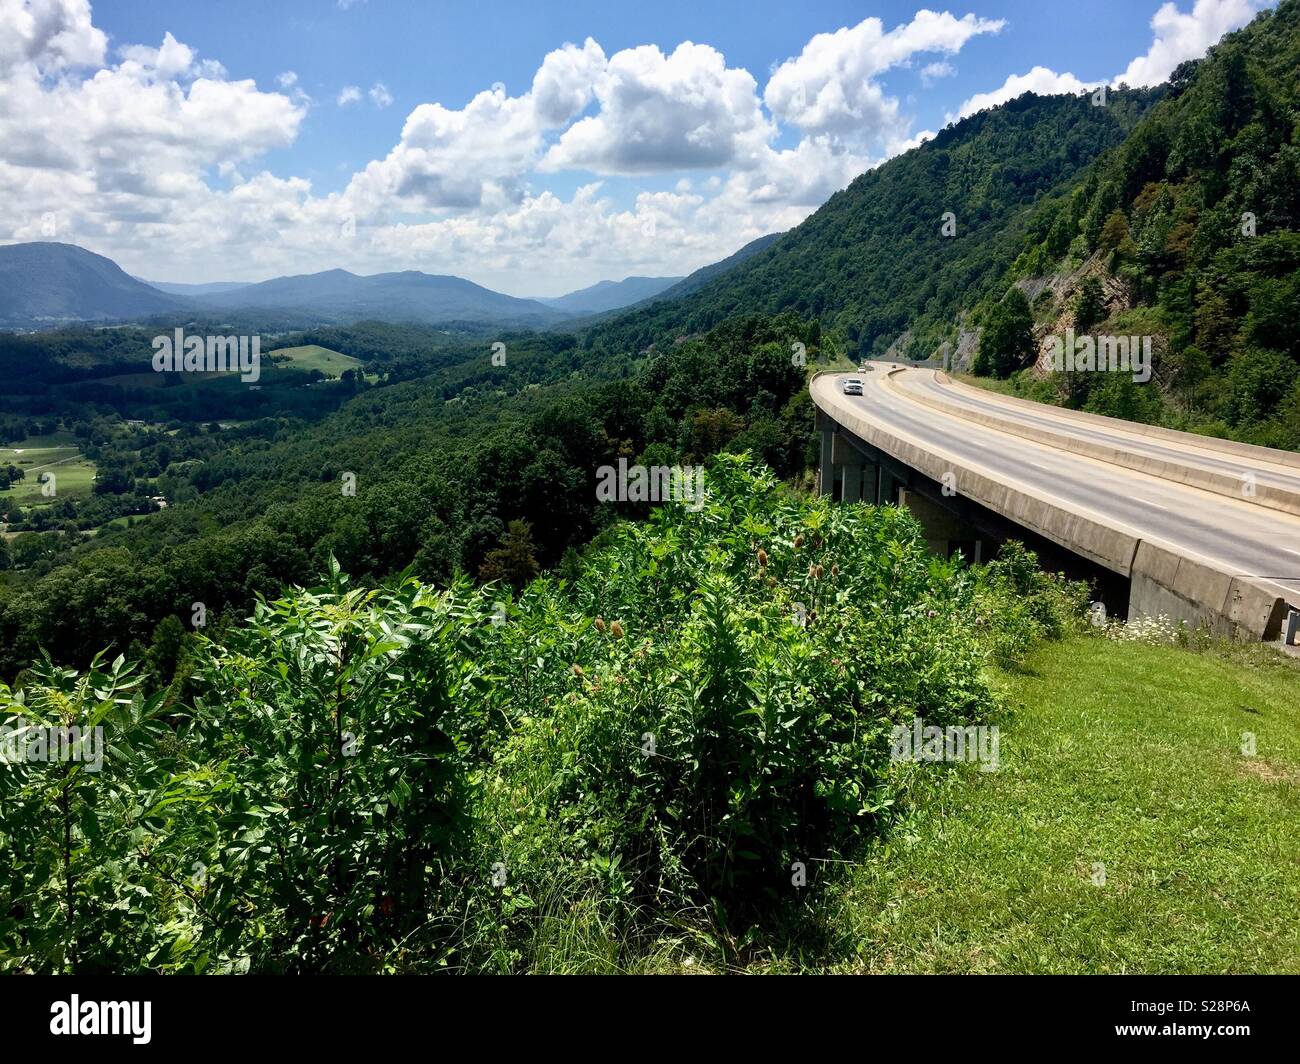 Big Stone Gap, Virginia, USA - July 23, 2018: Tourists travel along the Orby Cantrell Highway overlooking the Powell Valley in rural Southwest Virginia near the Kentucky border on a summer afternoon. Stock Photo